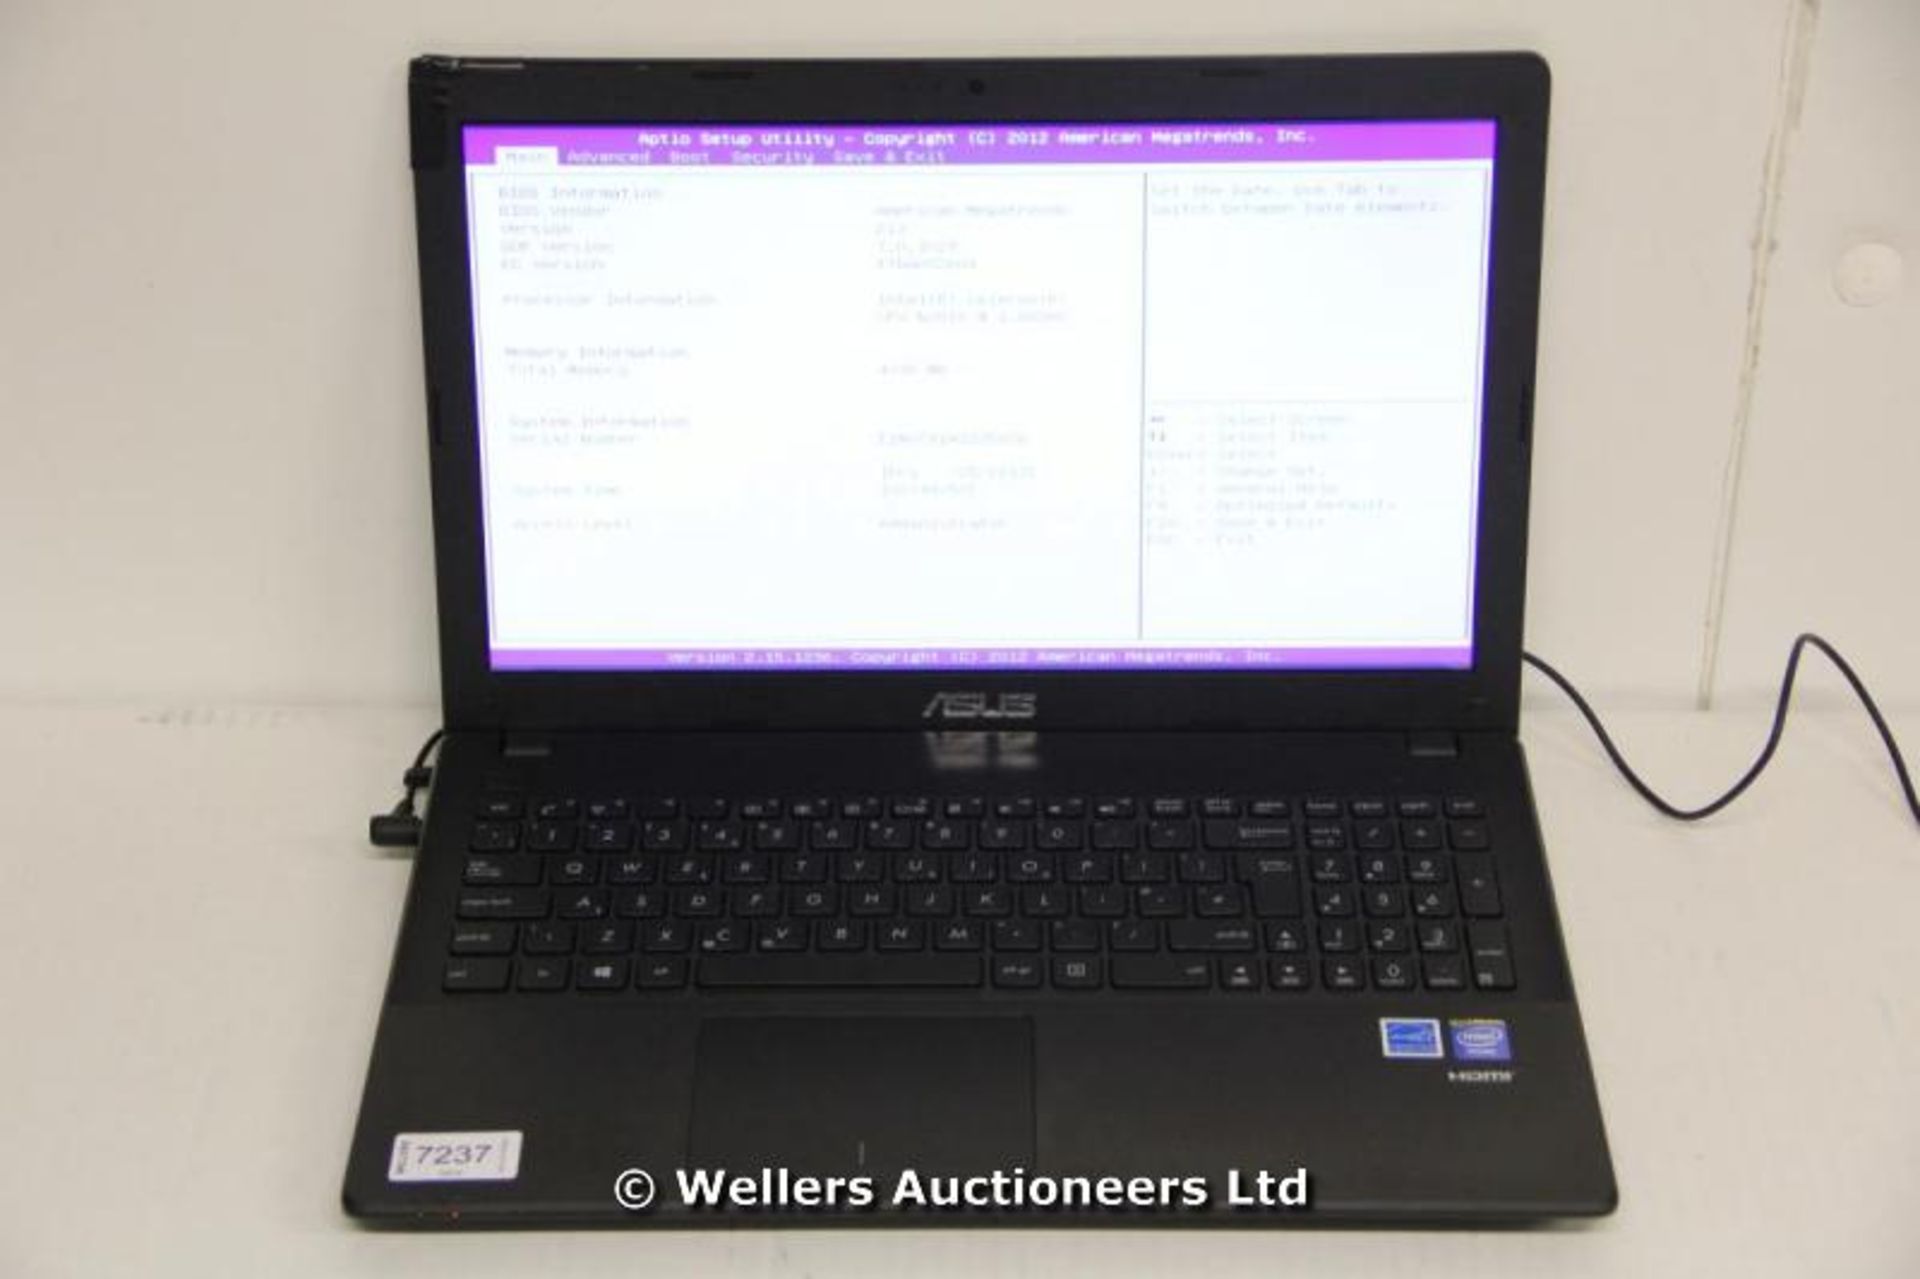 *"ASUS X551MA 15.6" LAPTOP / INTEL CELERON N2815 1.86GHZ / RAM 4GB / 500GB HDD / WITHOUT OPERATING